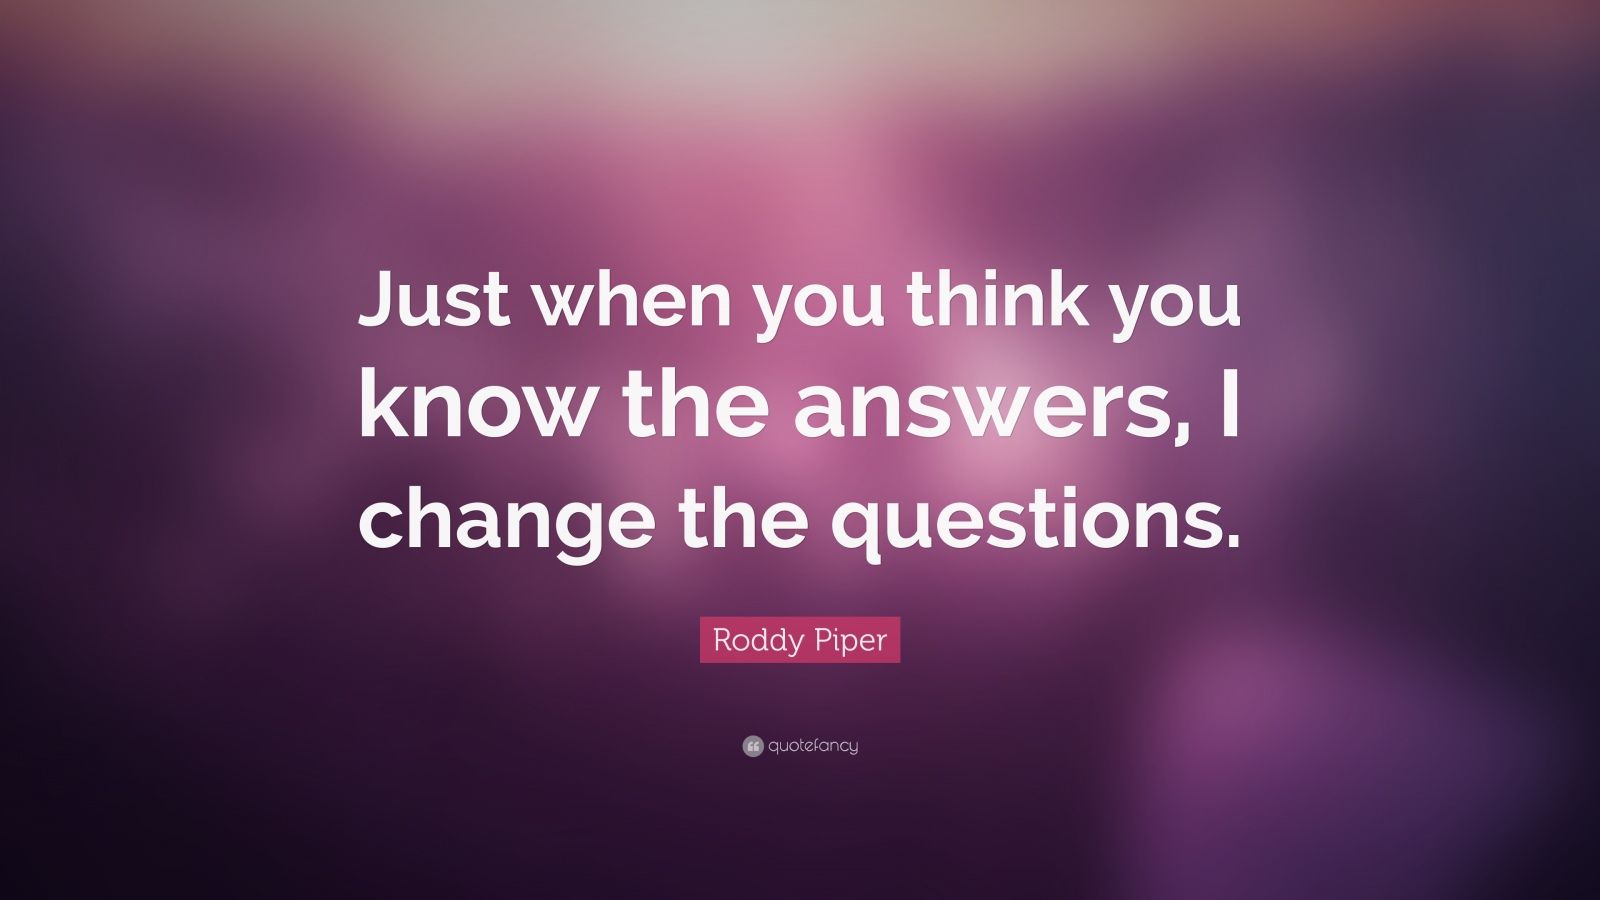 Roddy Piper Quote: “Just when you think you know the answers, I change